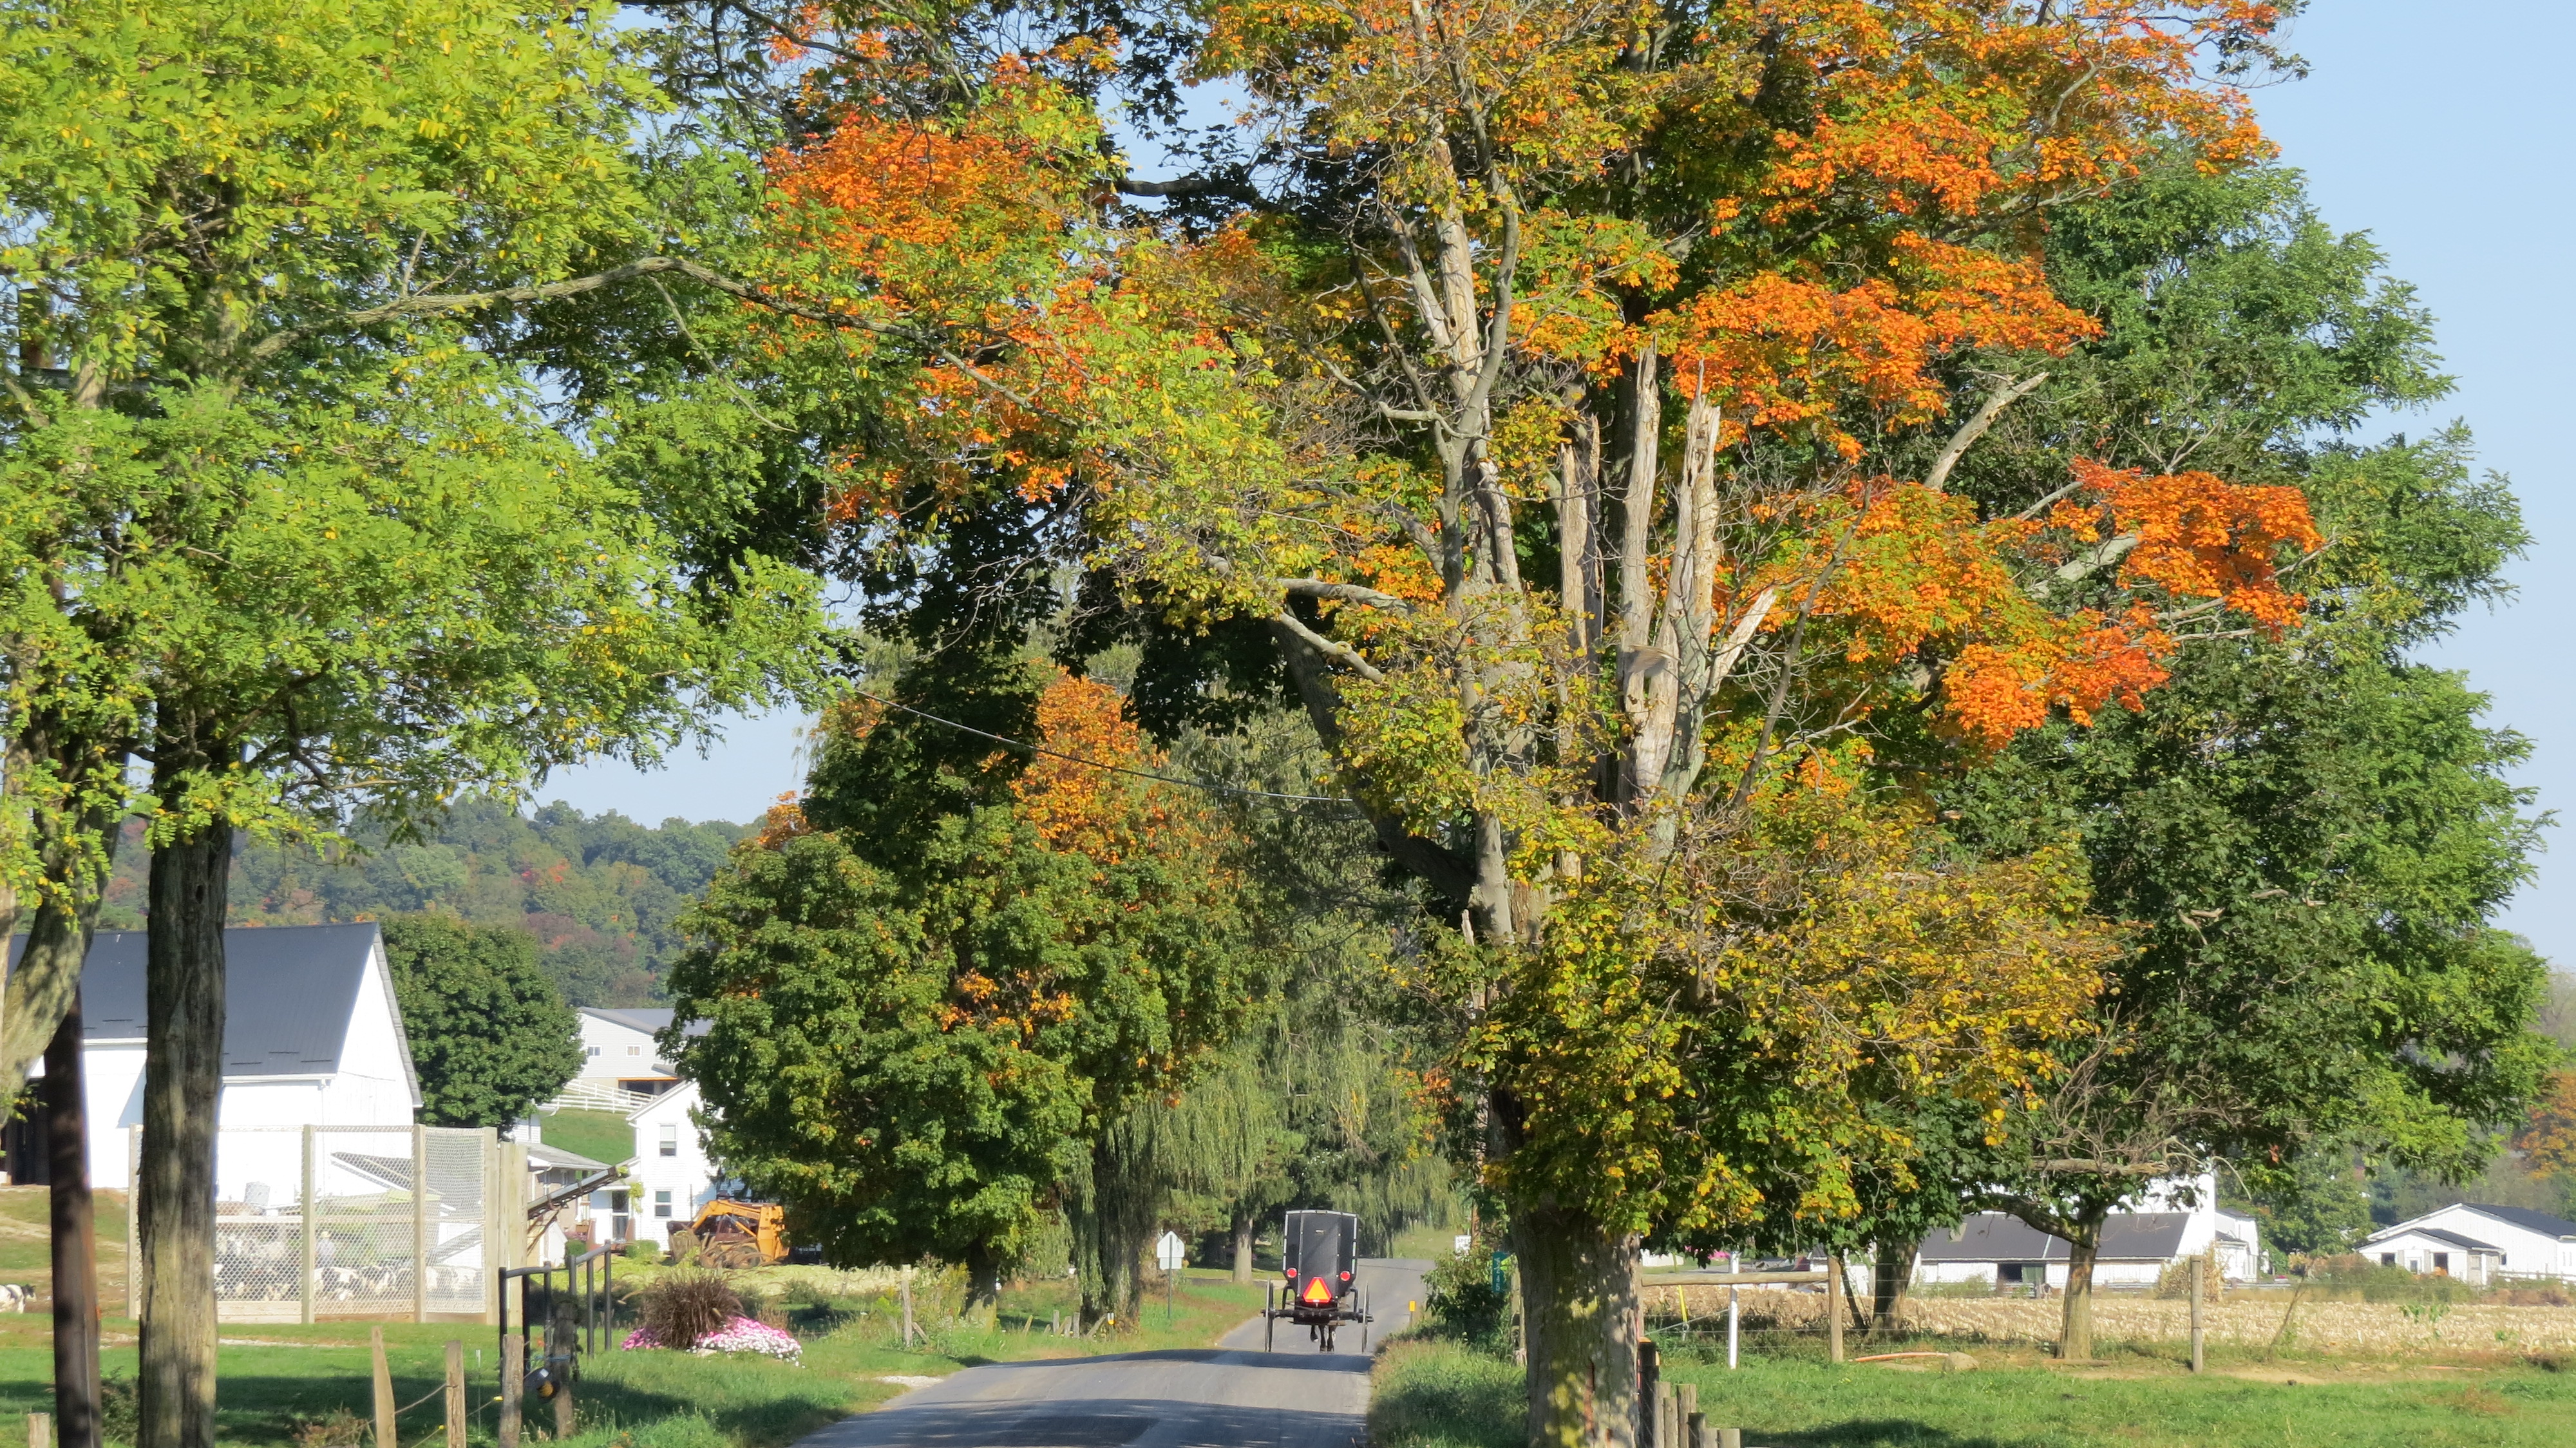 Amish buggy fall leaves by Bruce Stambaugh